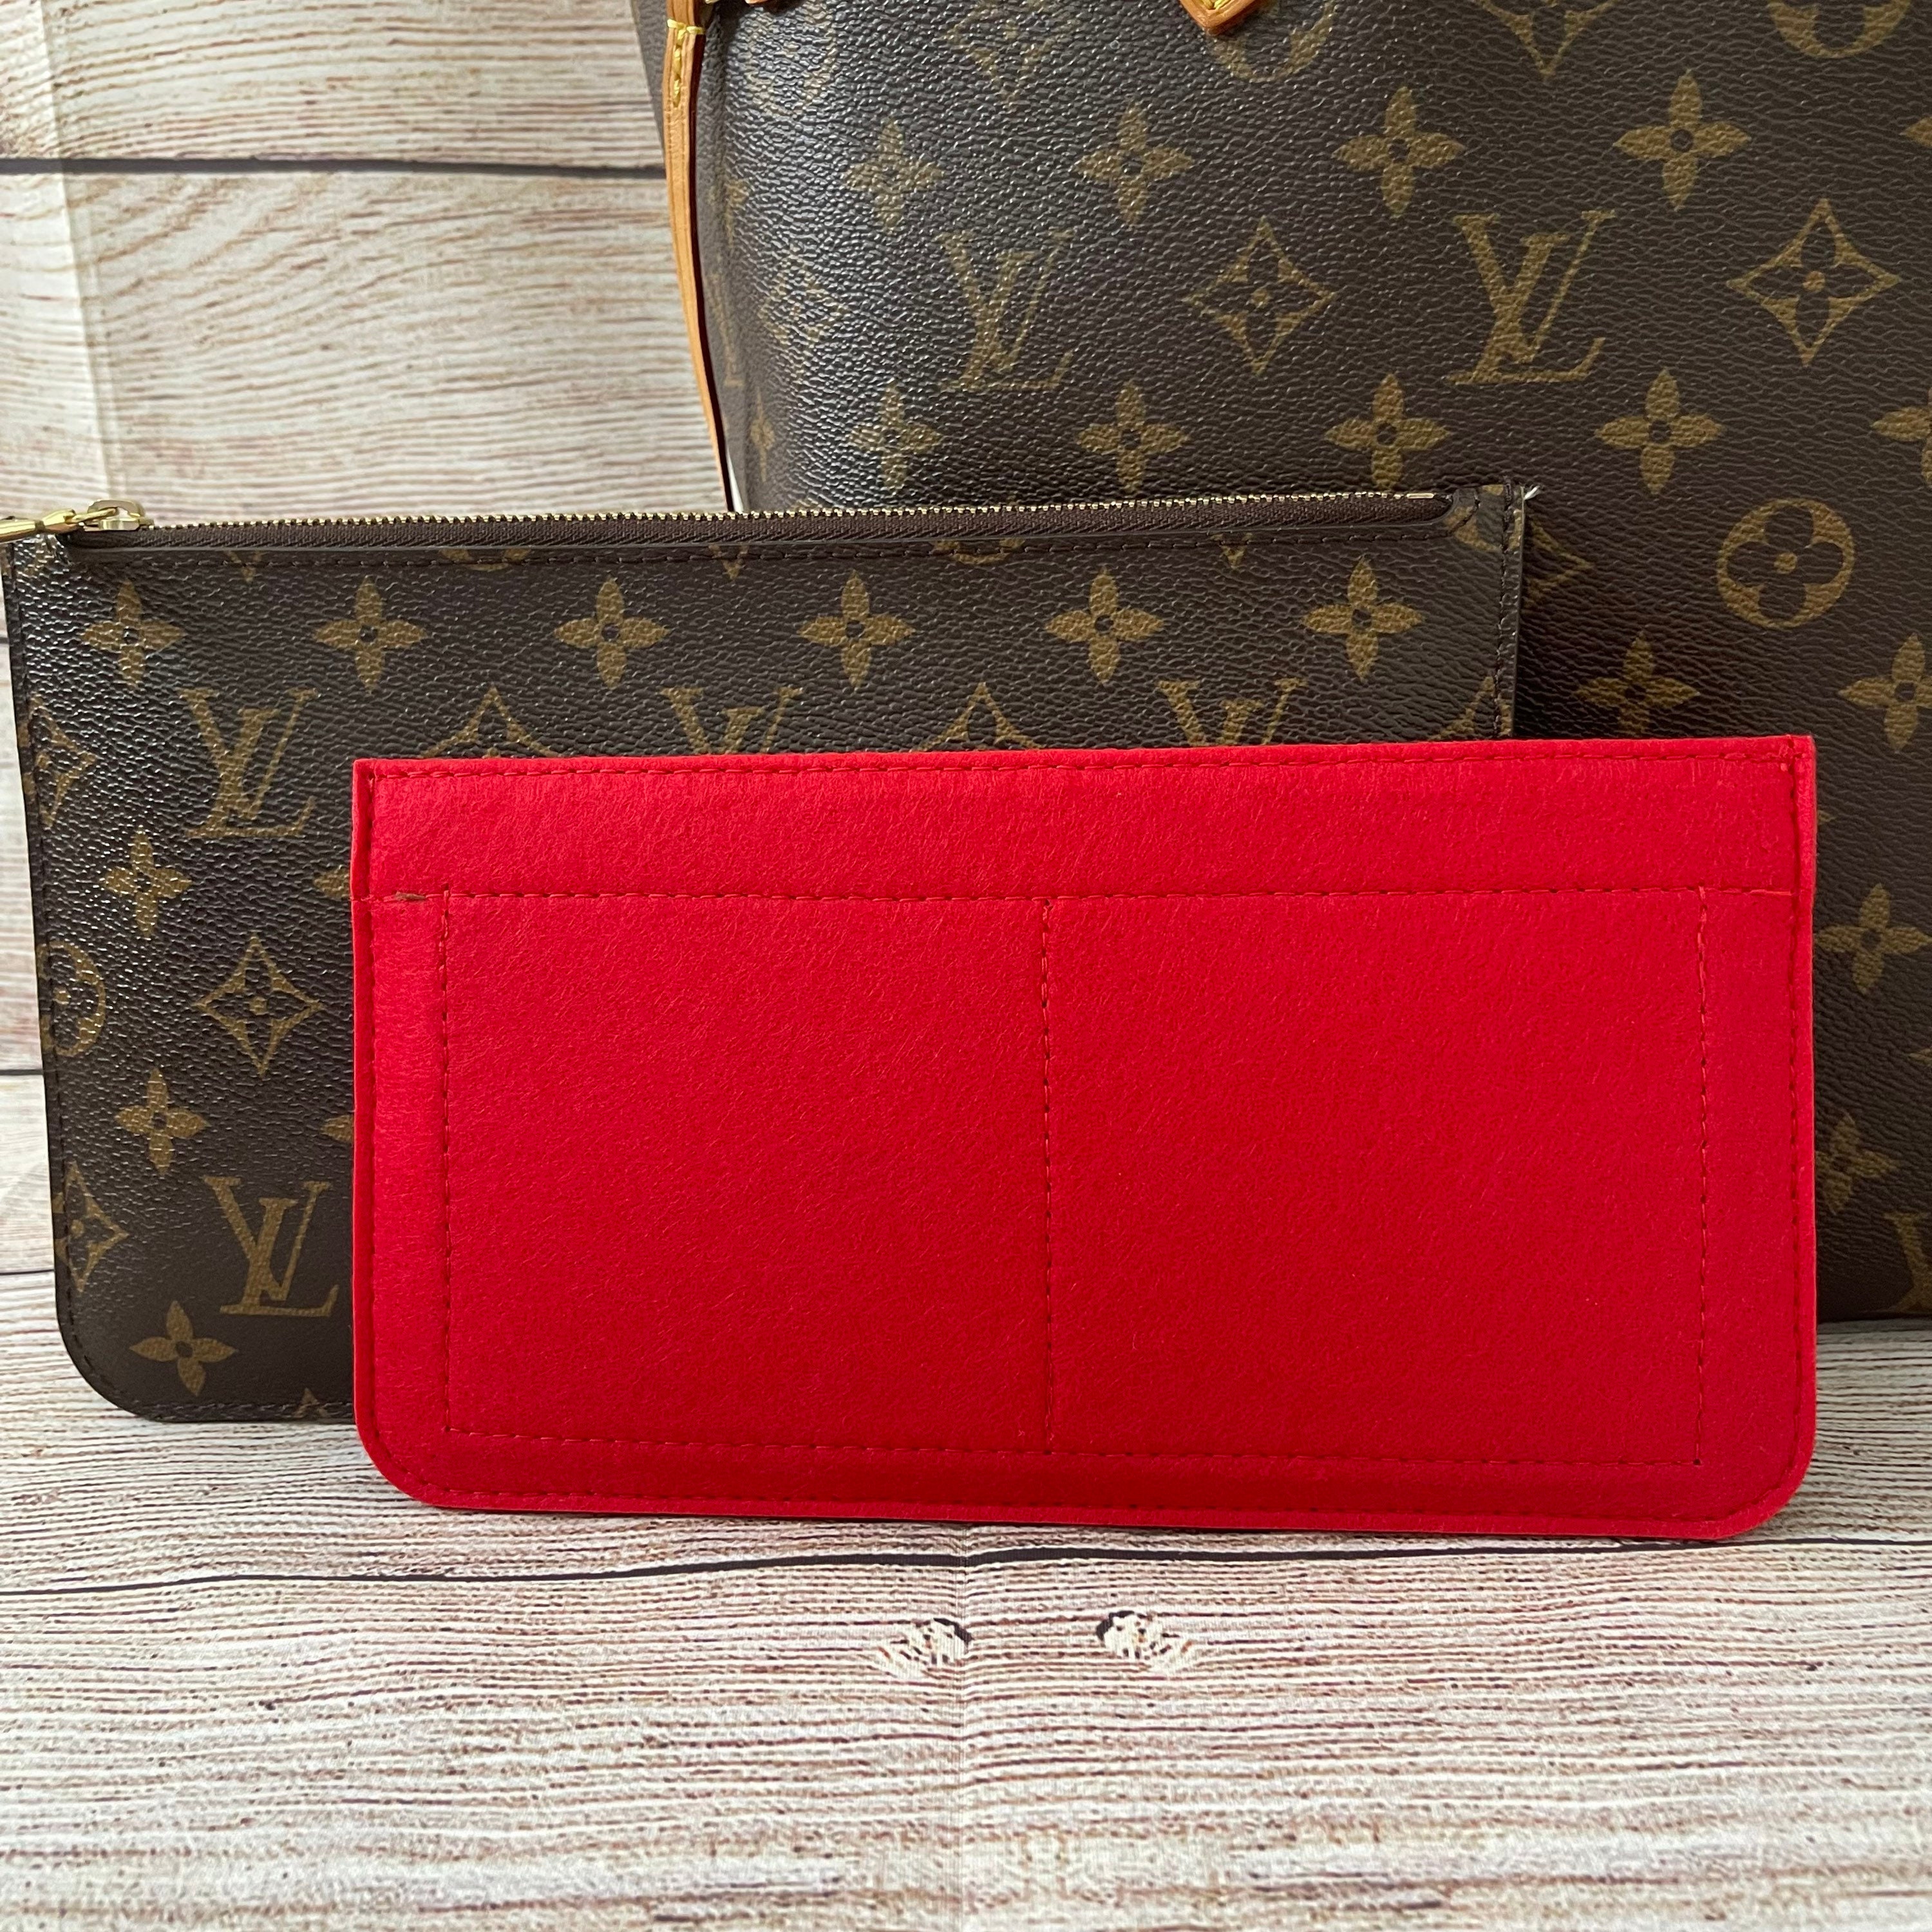 LV Neverfull MM with Removable Zipper at Top Bag organizer